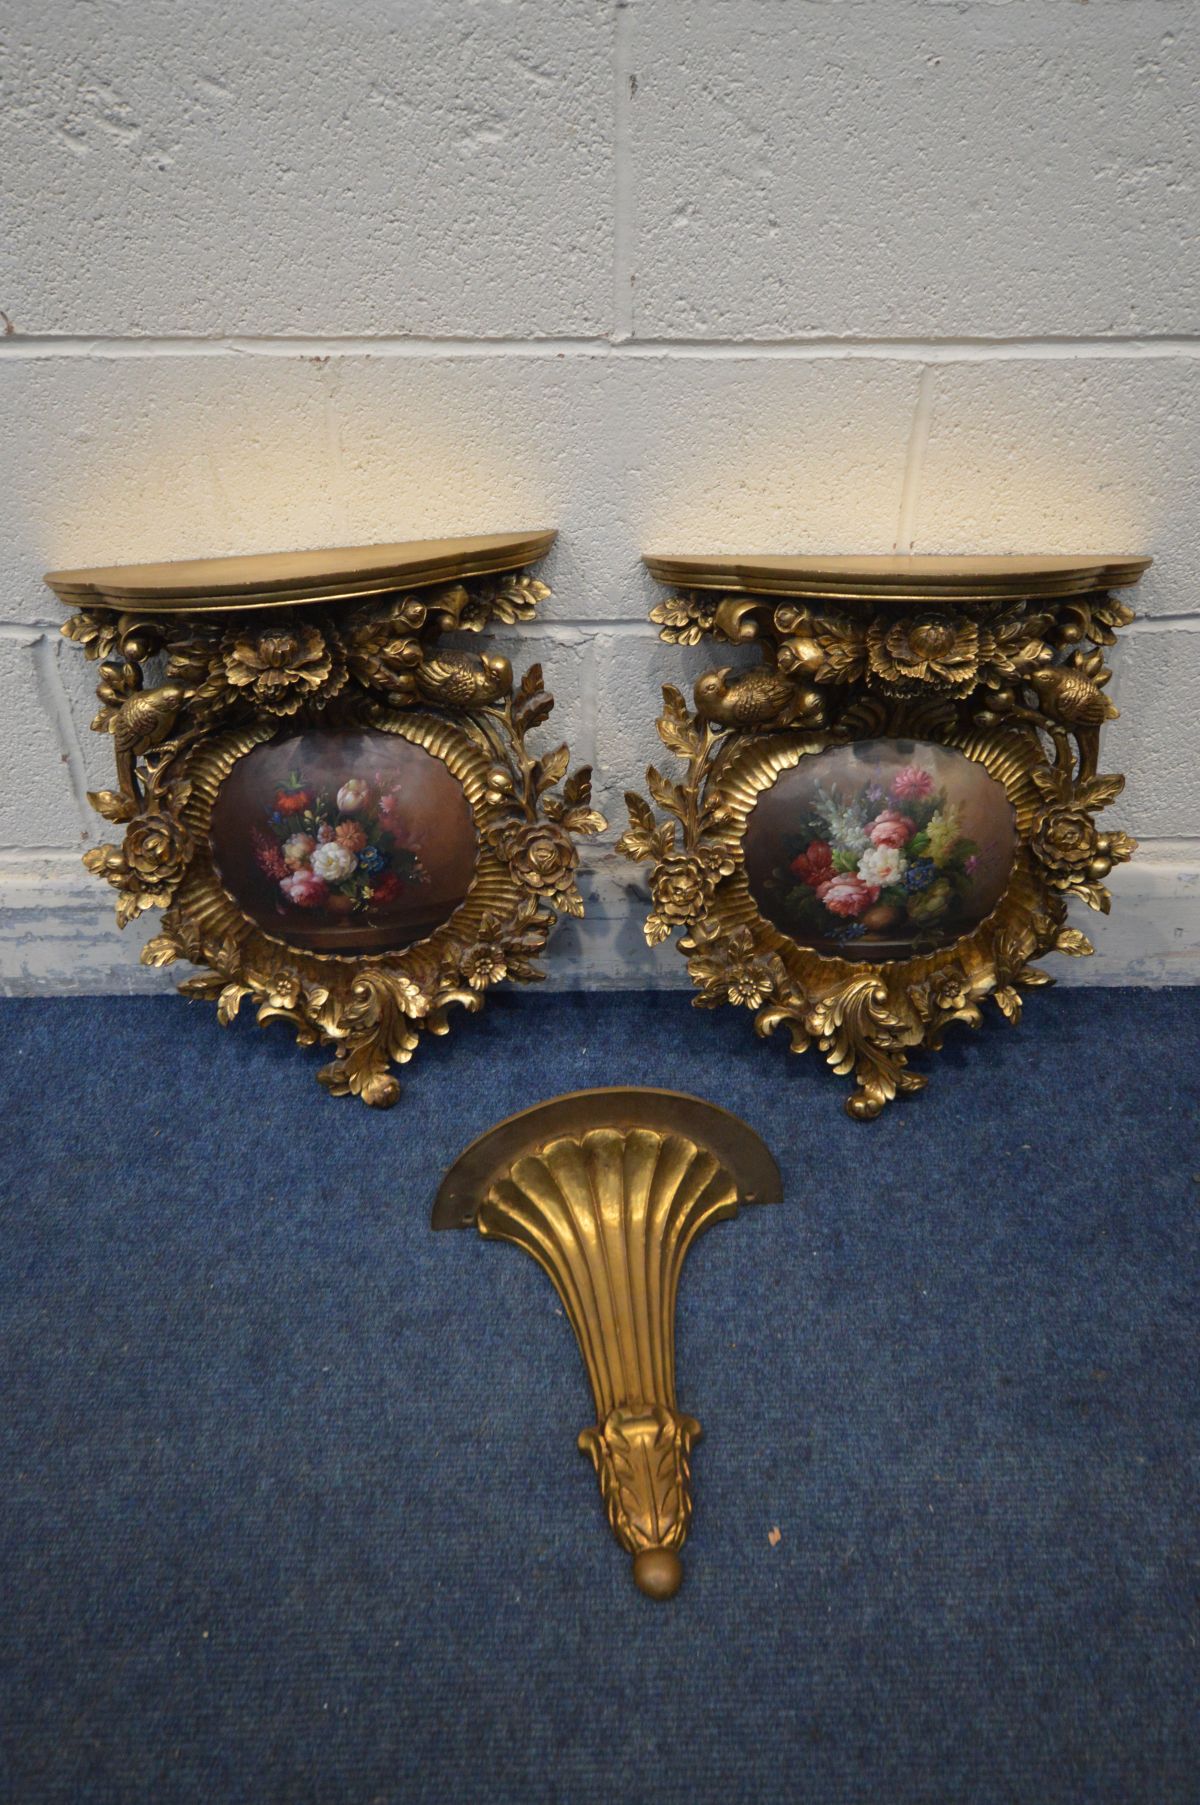 A PAIR OF LATE 20TH CENTURY GILTWOOD WALL SHELVES, florally carved surrounding a convex painting